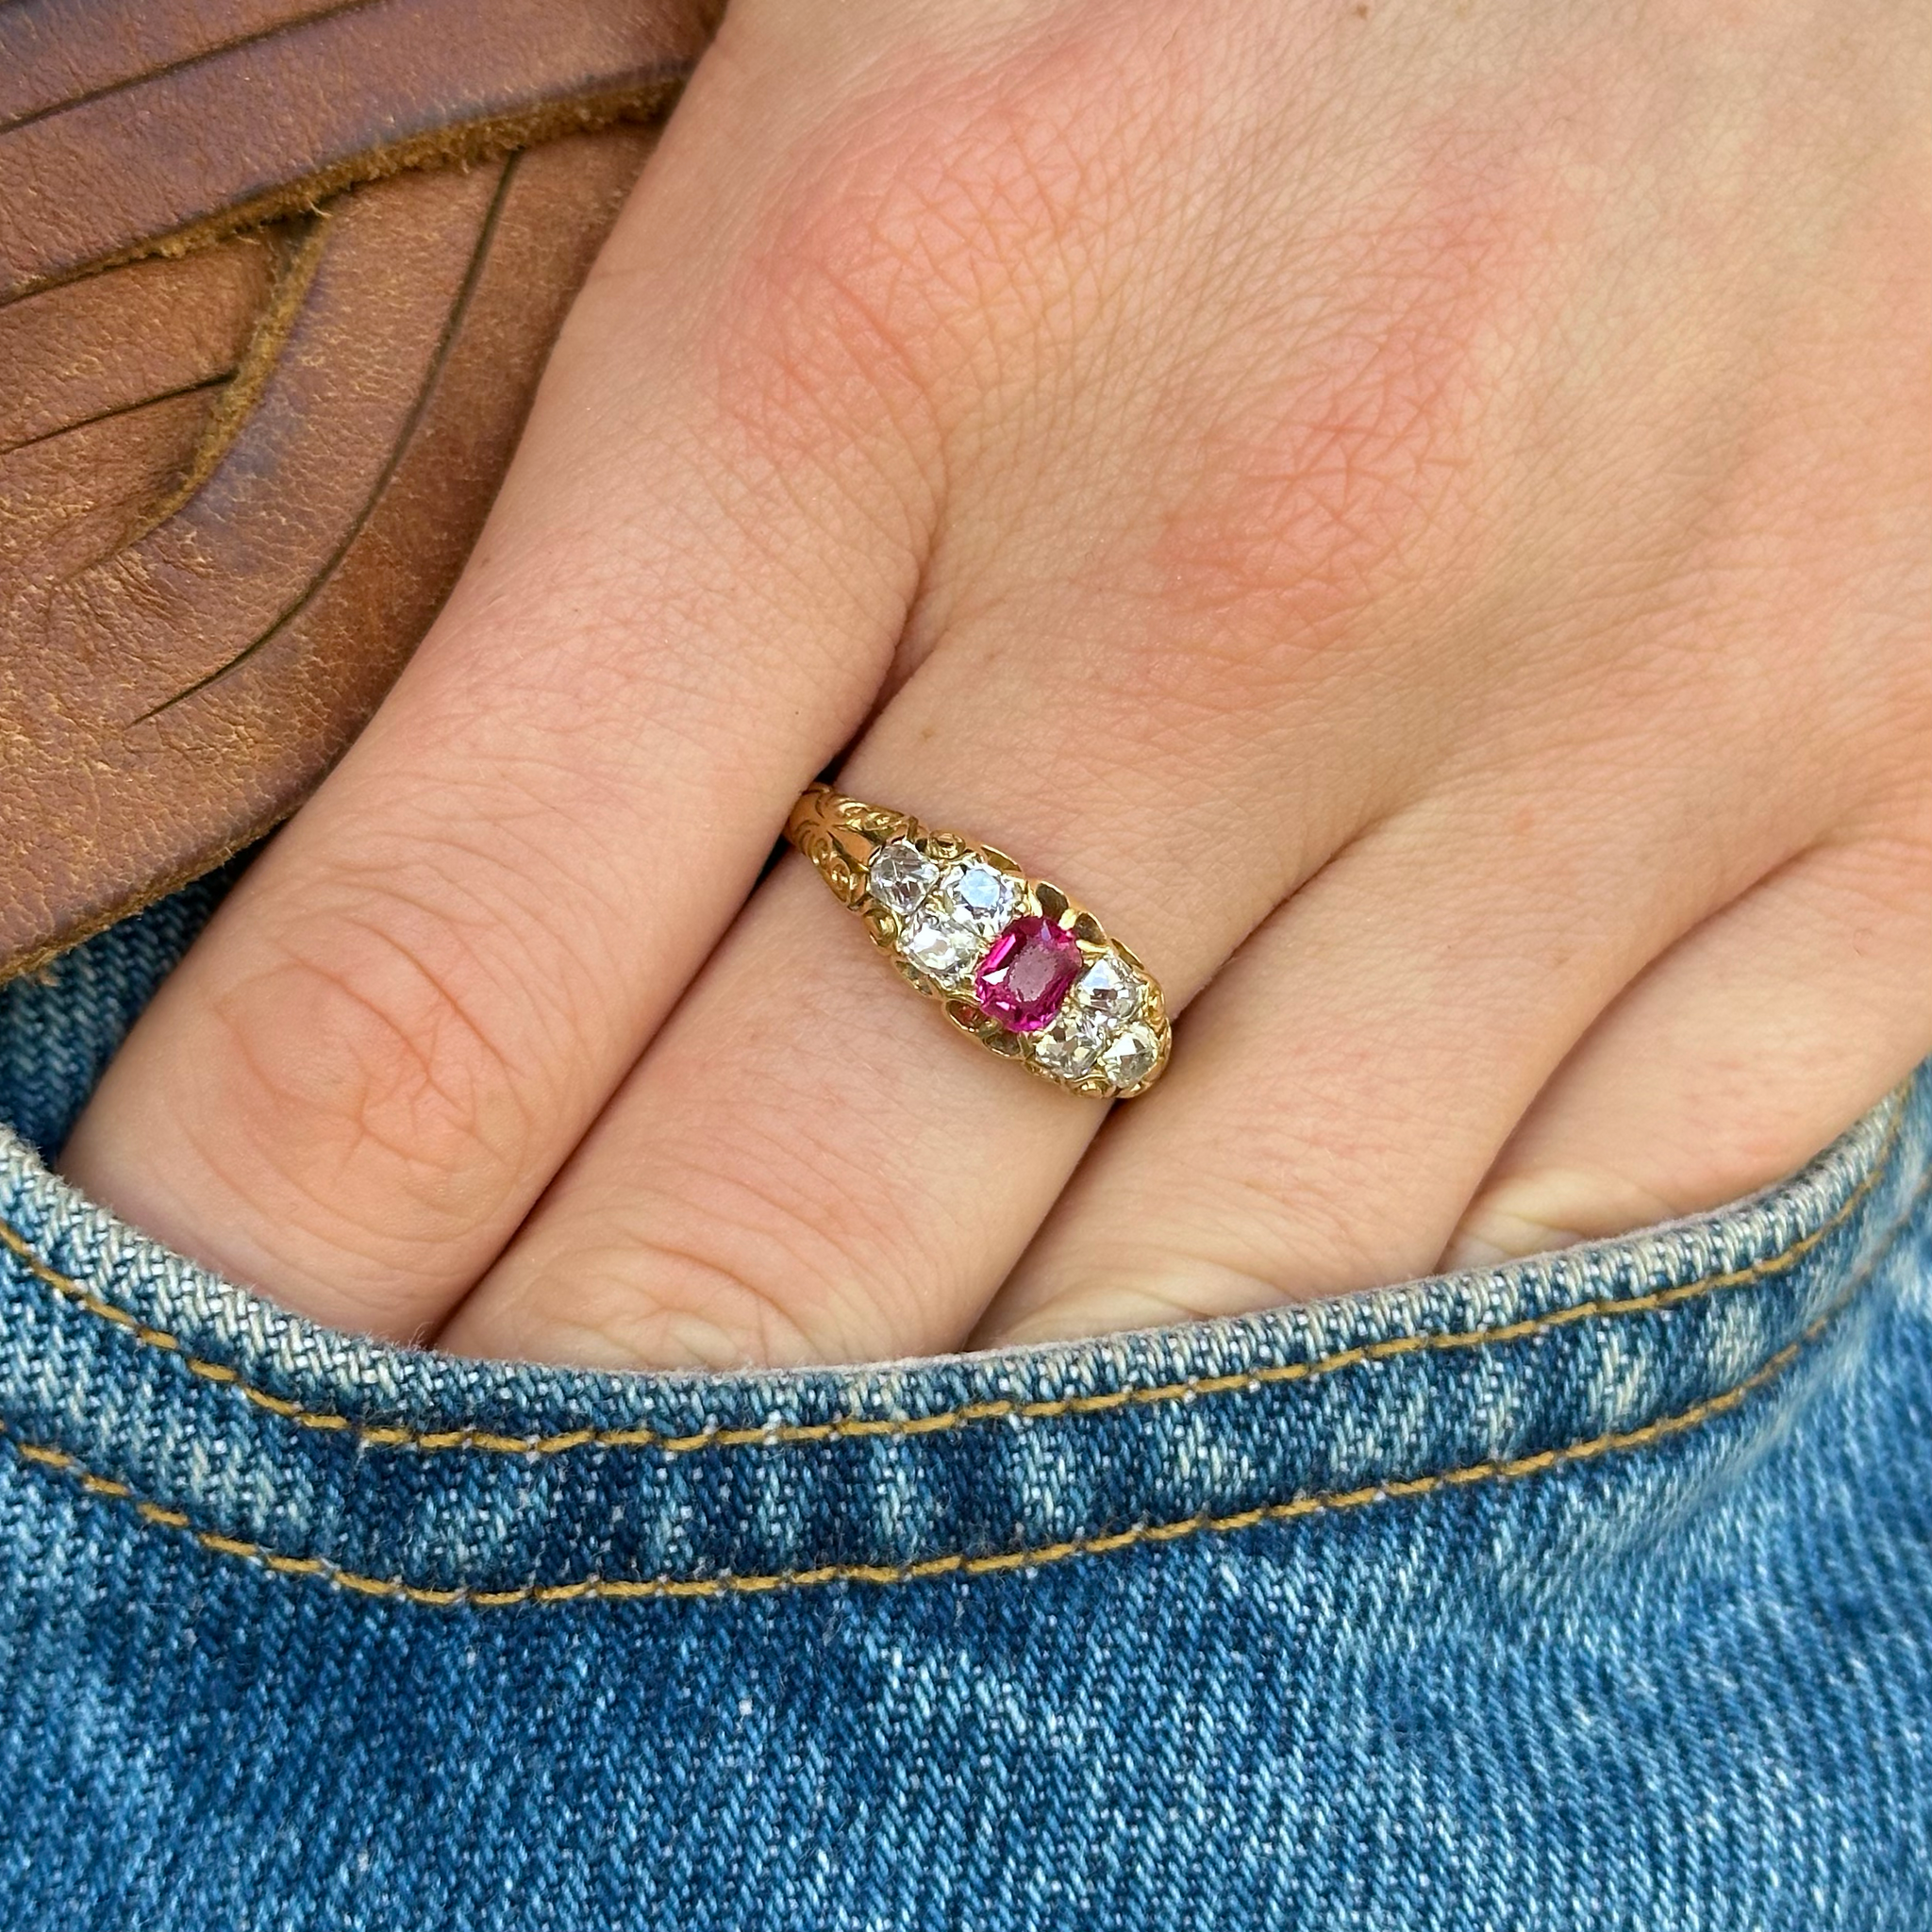 Antique, Victorian Burmese Ruby and Diamond Engagement Ring, 18ct Yellow Gold worn on hand in pocket of jeans